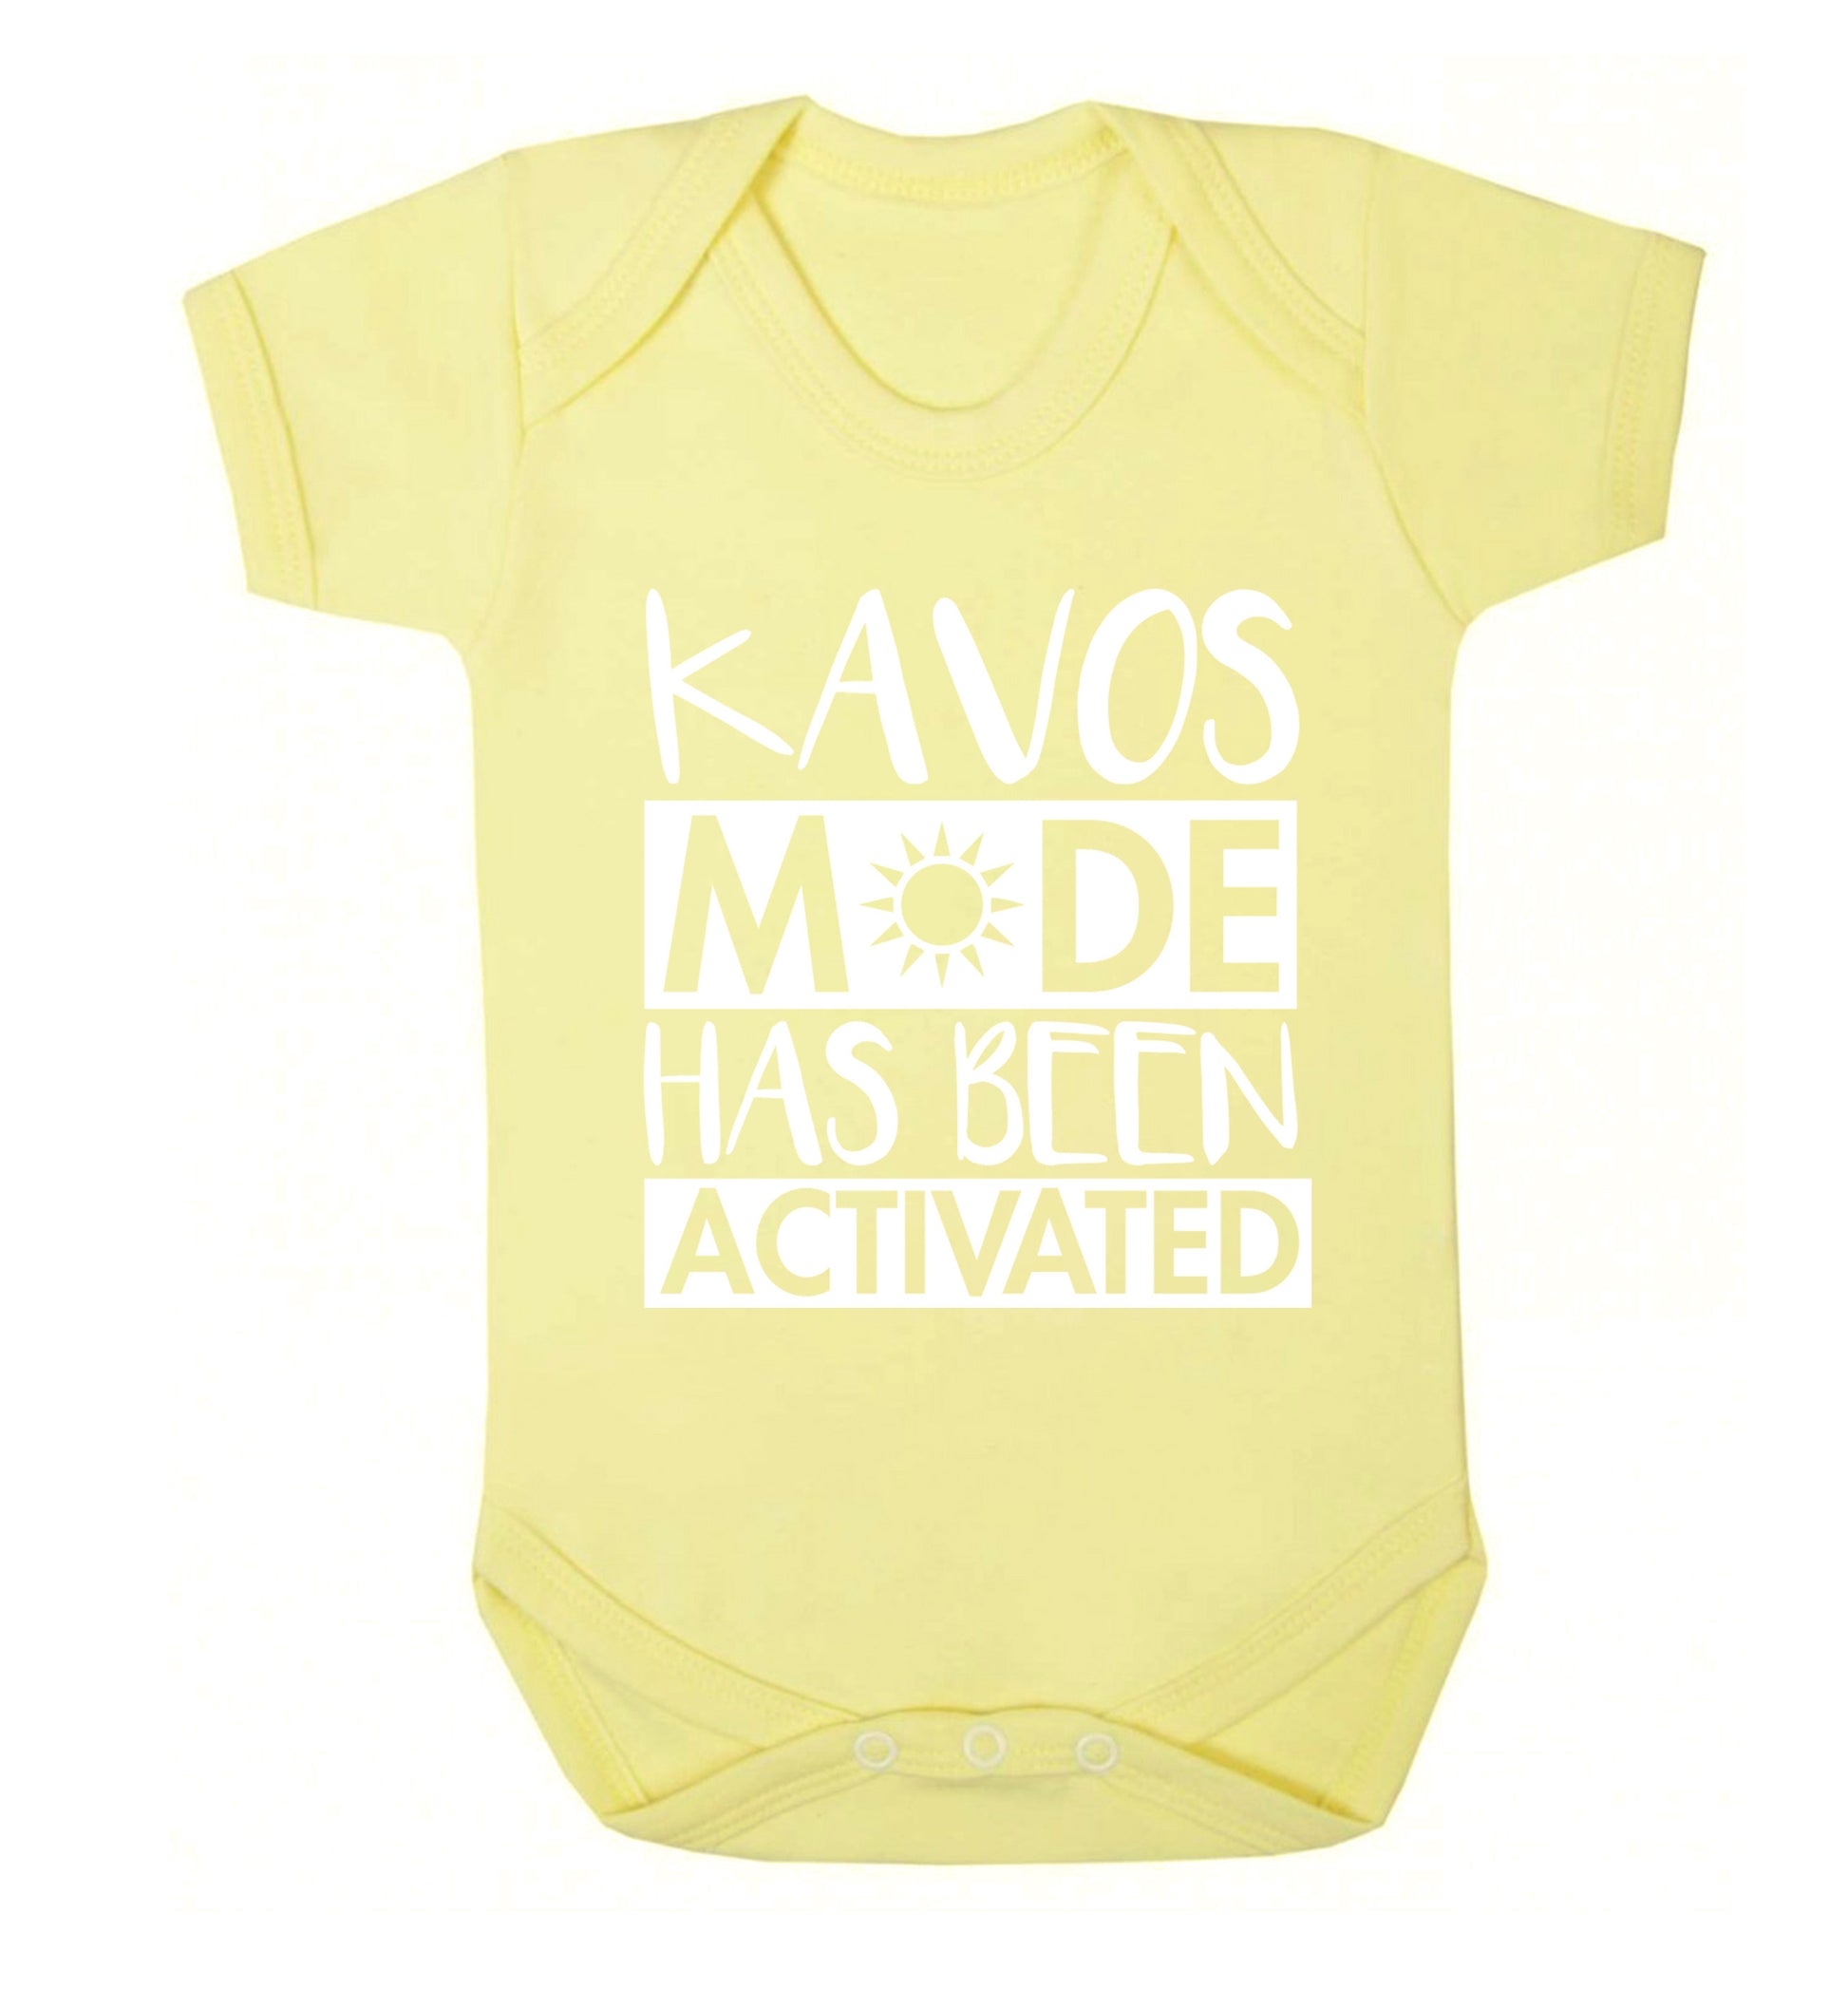 Kavos mode has been activated Baby Vest pale yellow 18-24 months